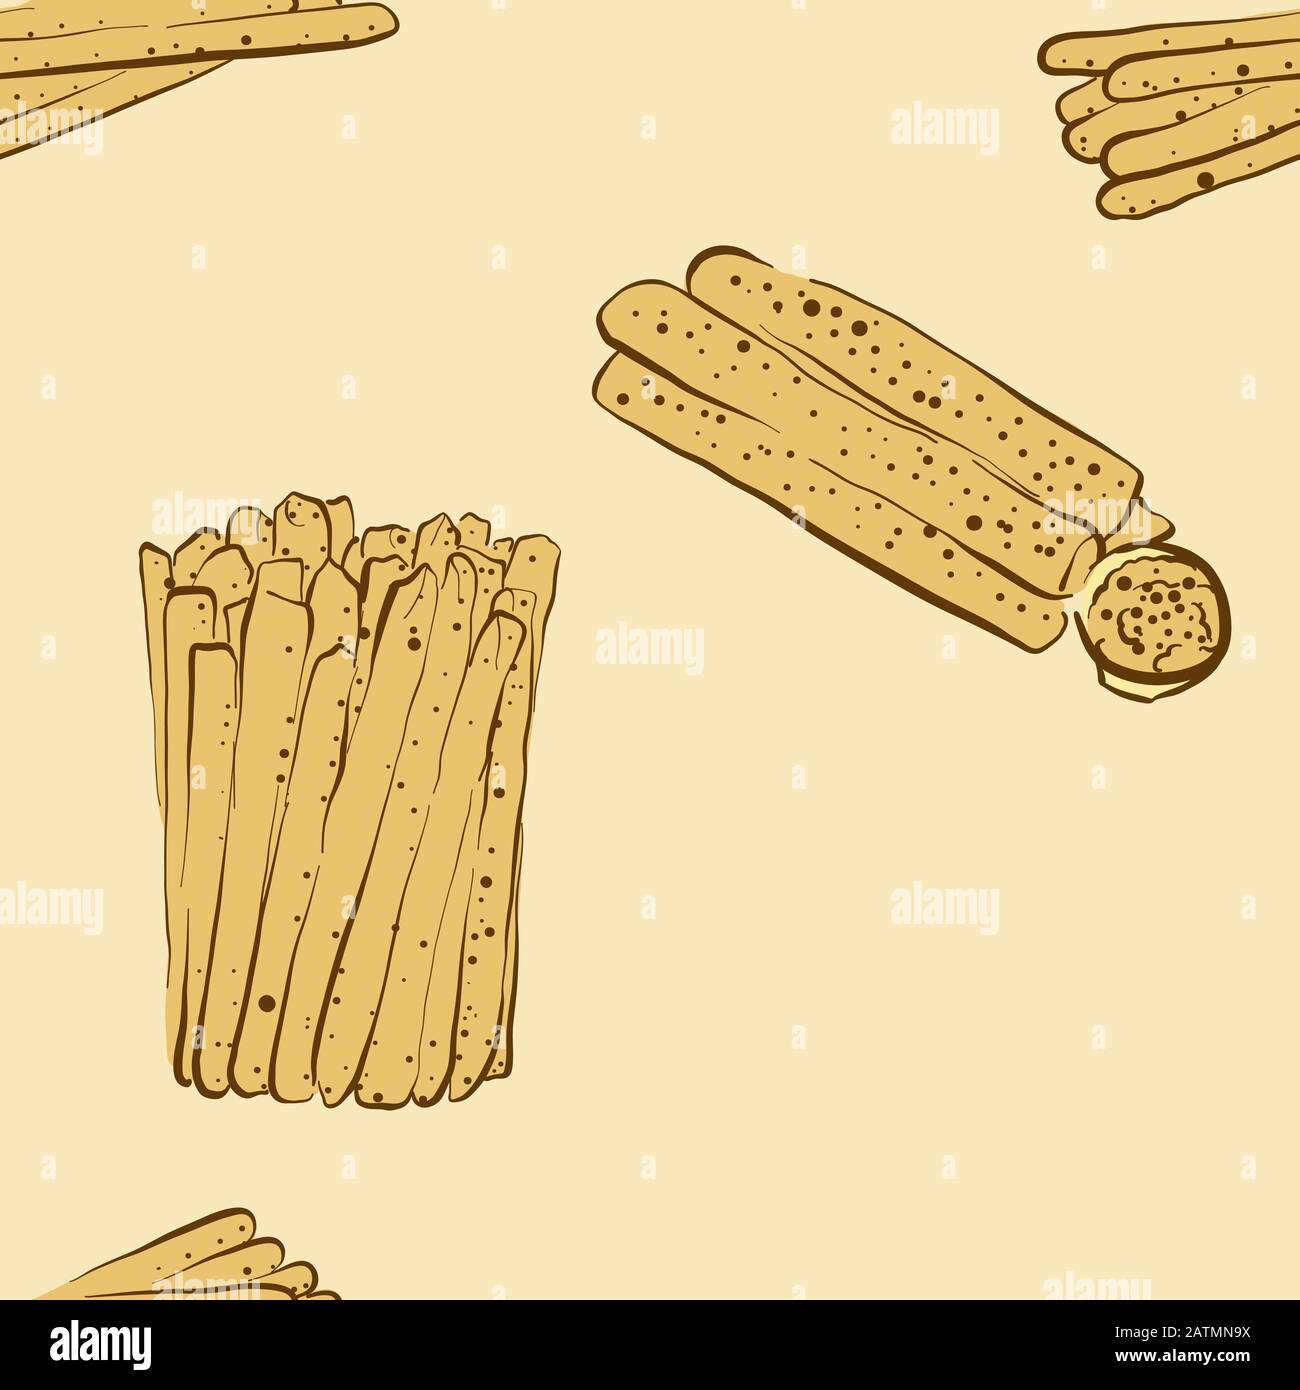 Seamless pattern of sketched Breadstick bread. Useable for wallpaper or any sized decoration. Handdrawn Vector Illustration Stock Vector